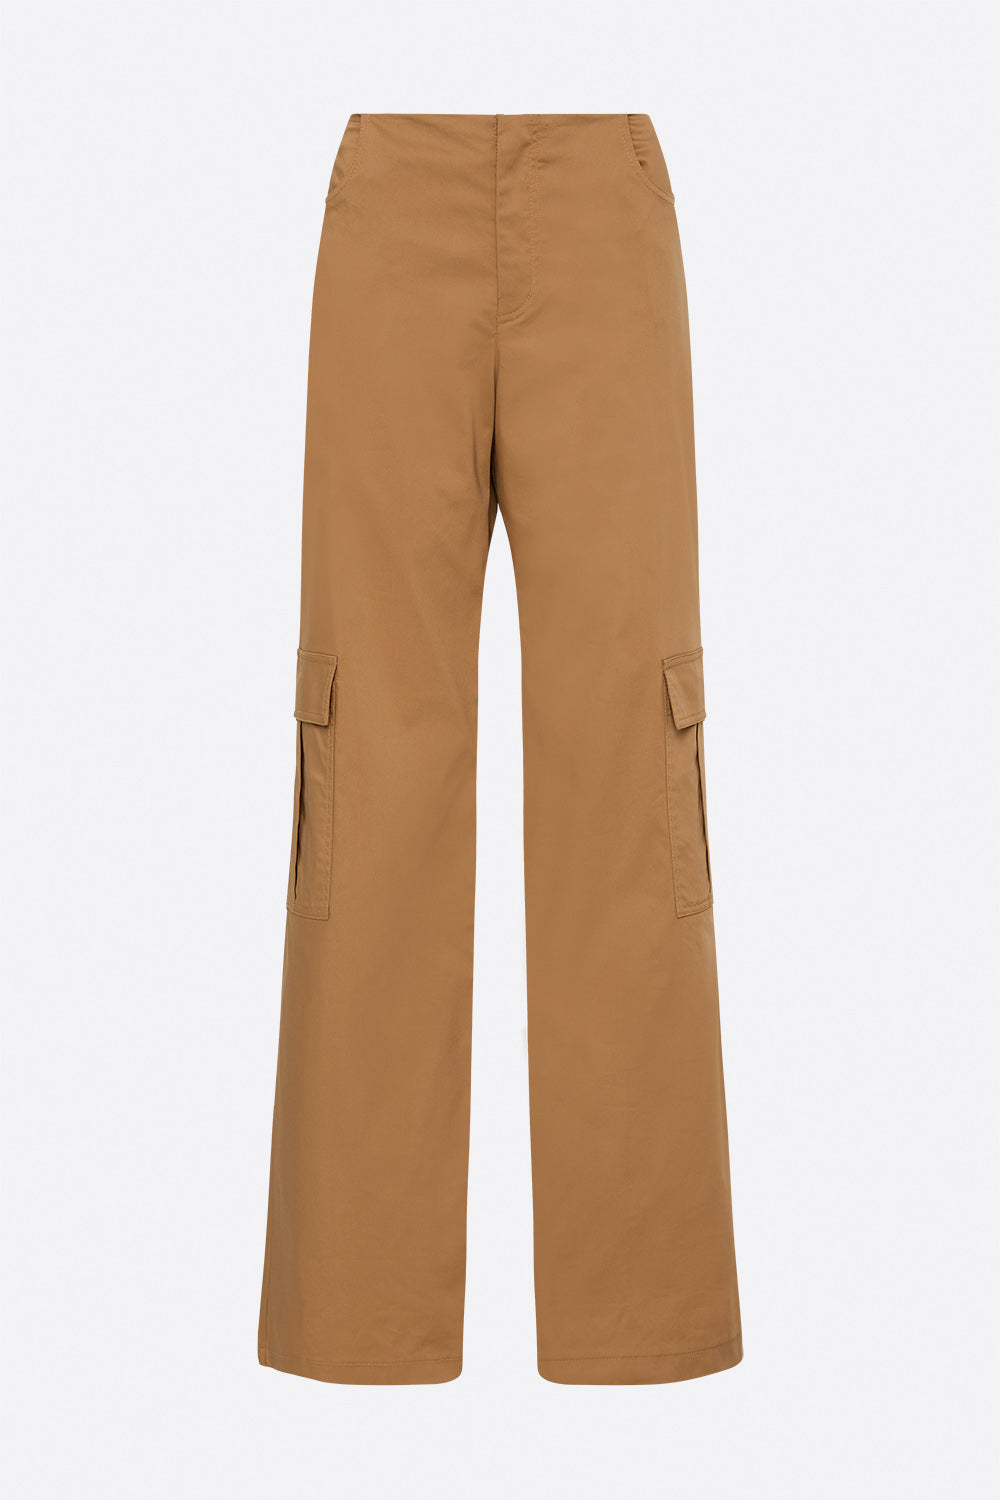 Cool Clique Hipster Pant